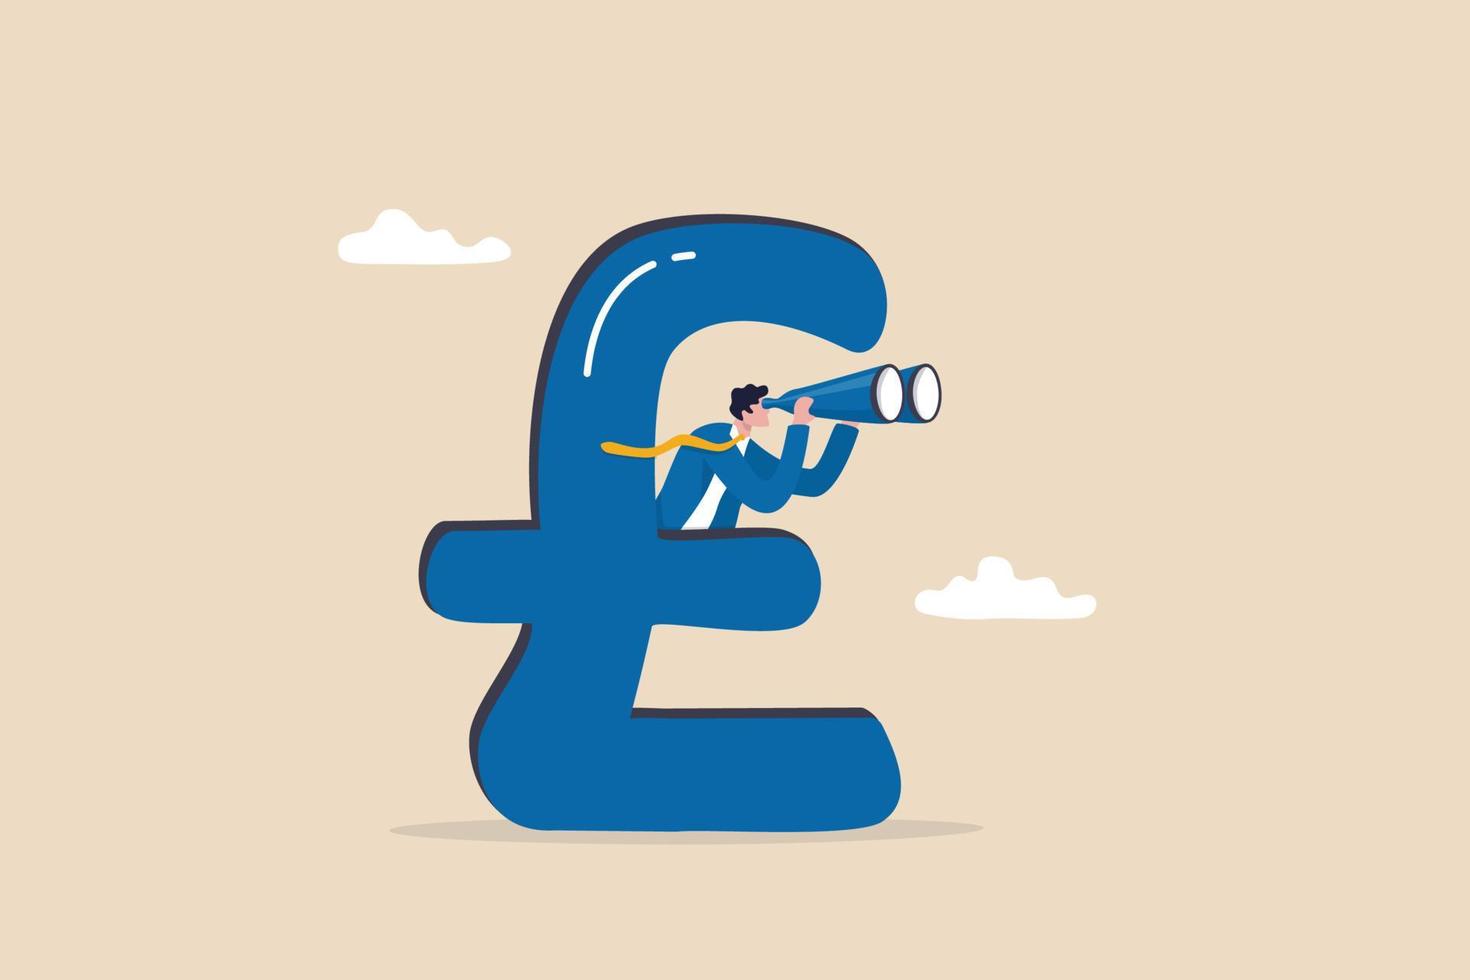 UK, United Kingdom economy forecast, financial or business visionary, England investment profit opportunity concept, businessman hiding behind large UK currency pound using binoculars to see future. vector